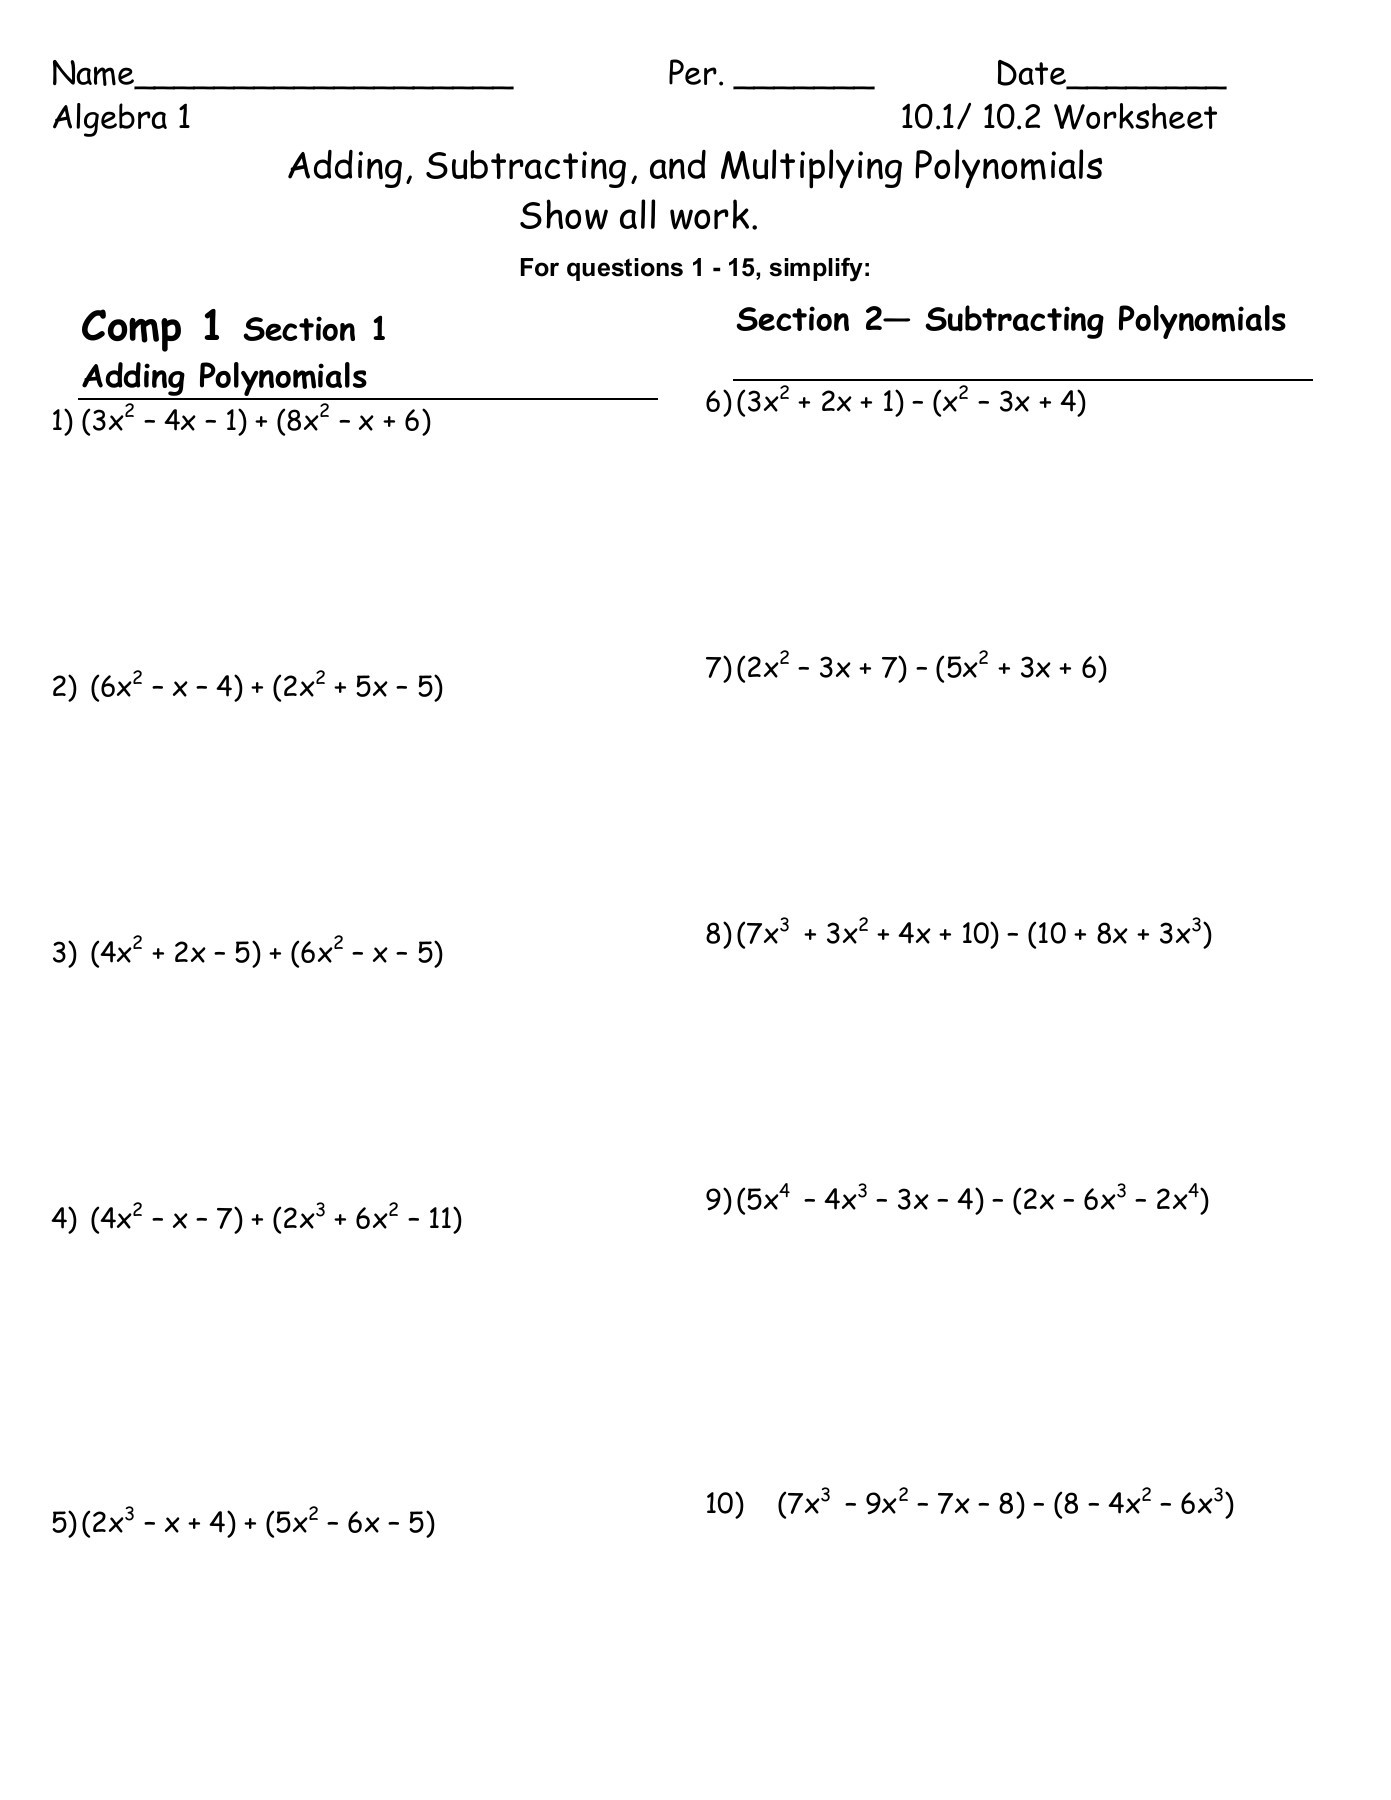 Adding and Subtracting Polynomials Worksheet Ss Pages 1 4 Text Version